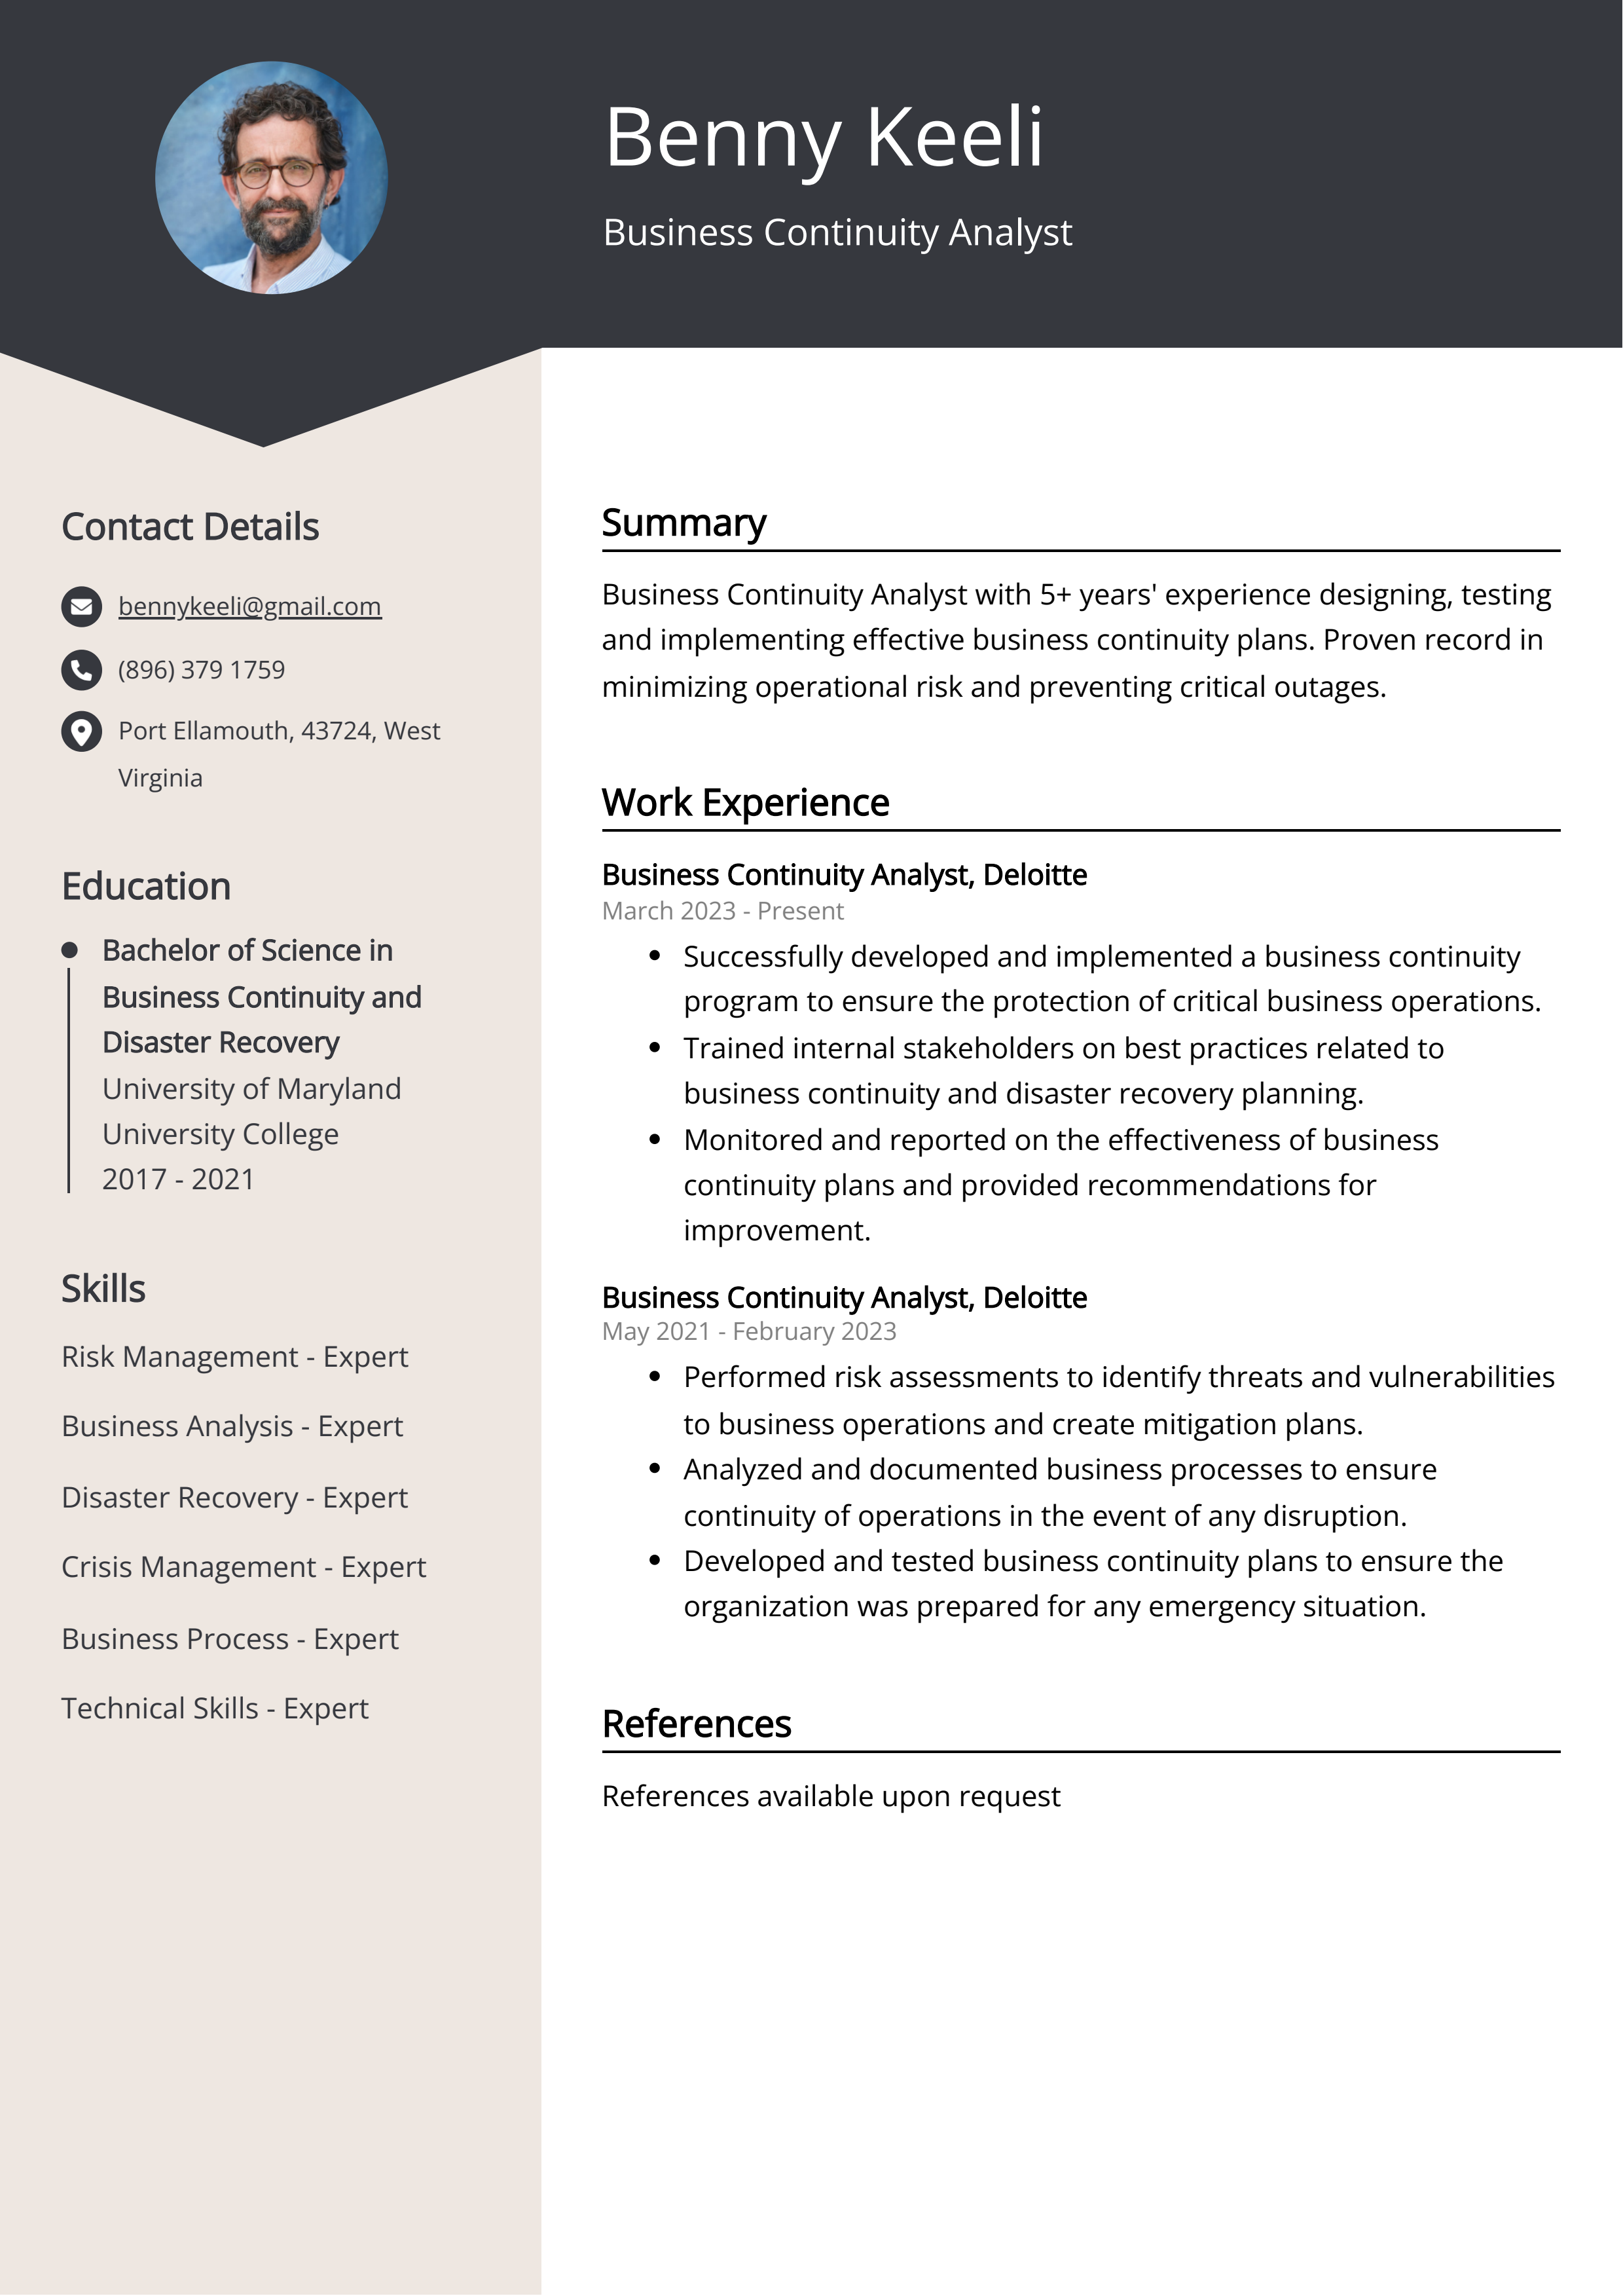 Business Continuity Analyst Resume Example